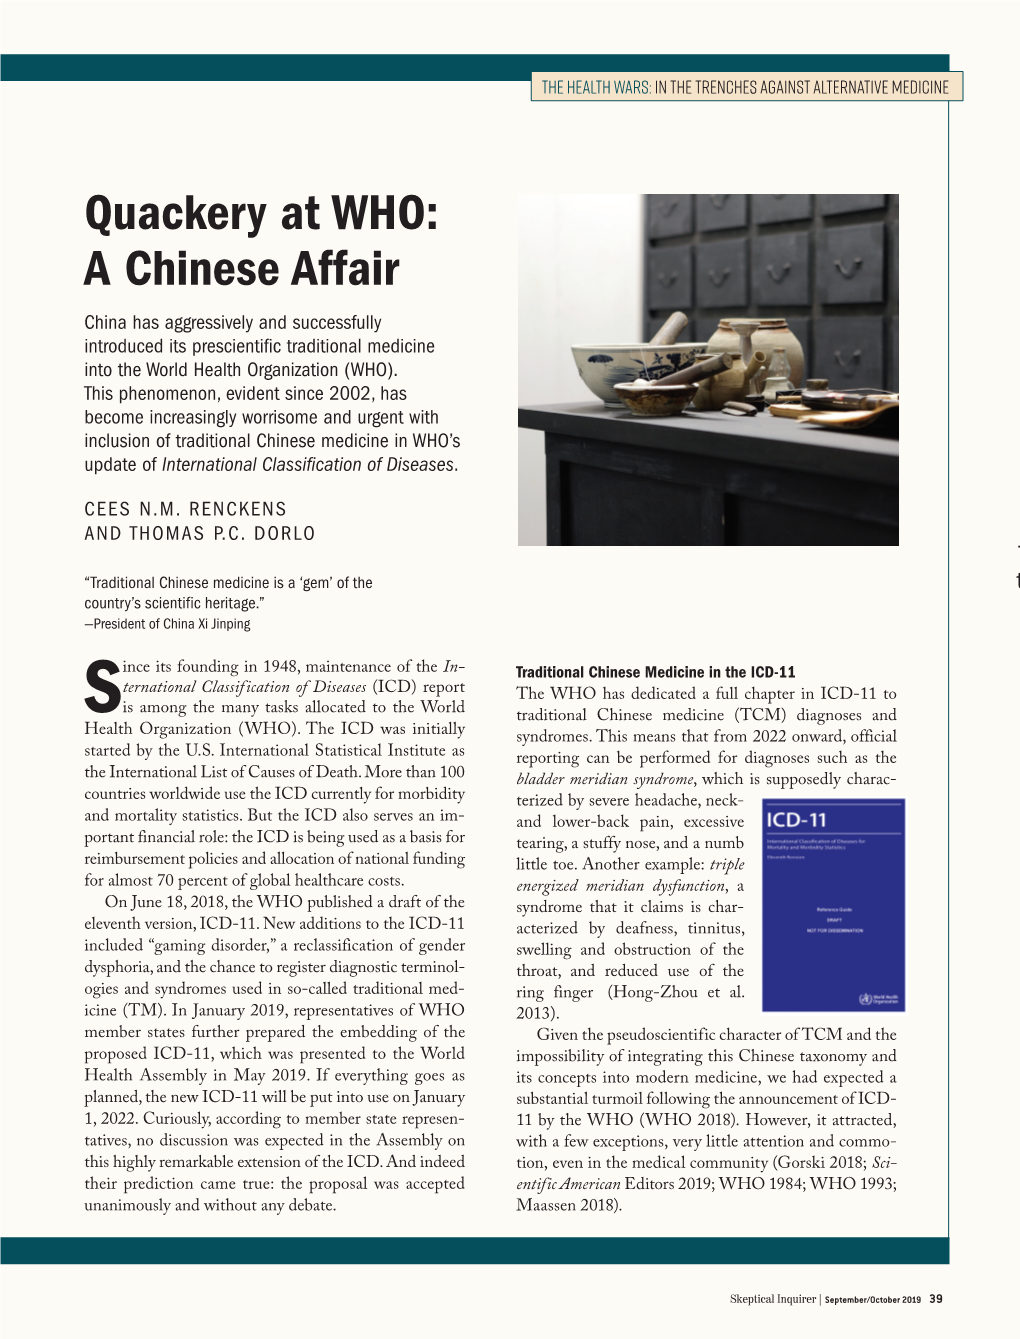 Quackery at WHO: a Chinese Affair China Has Aggressively and Successfully Introduced Its Prescientific Traditional Medicine Into the World Health Organization (WHO)